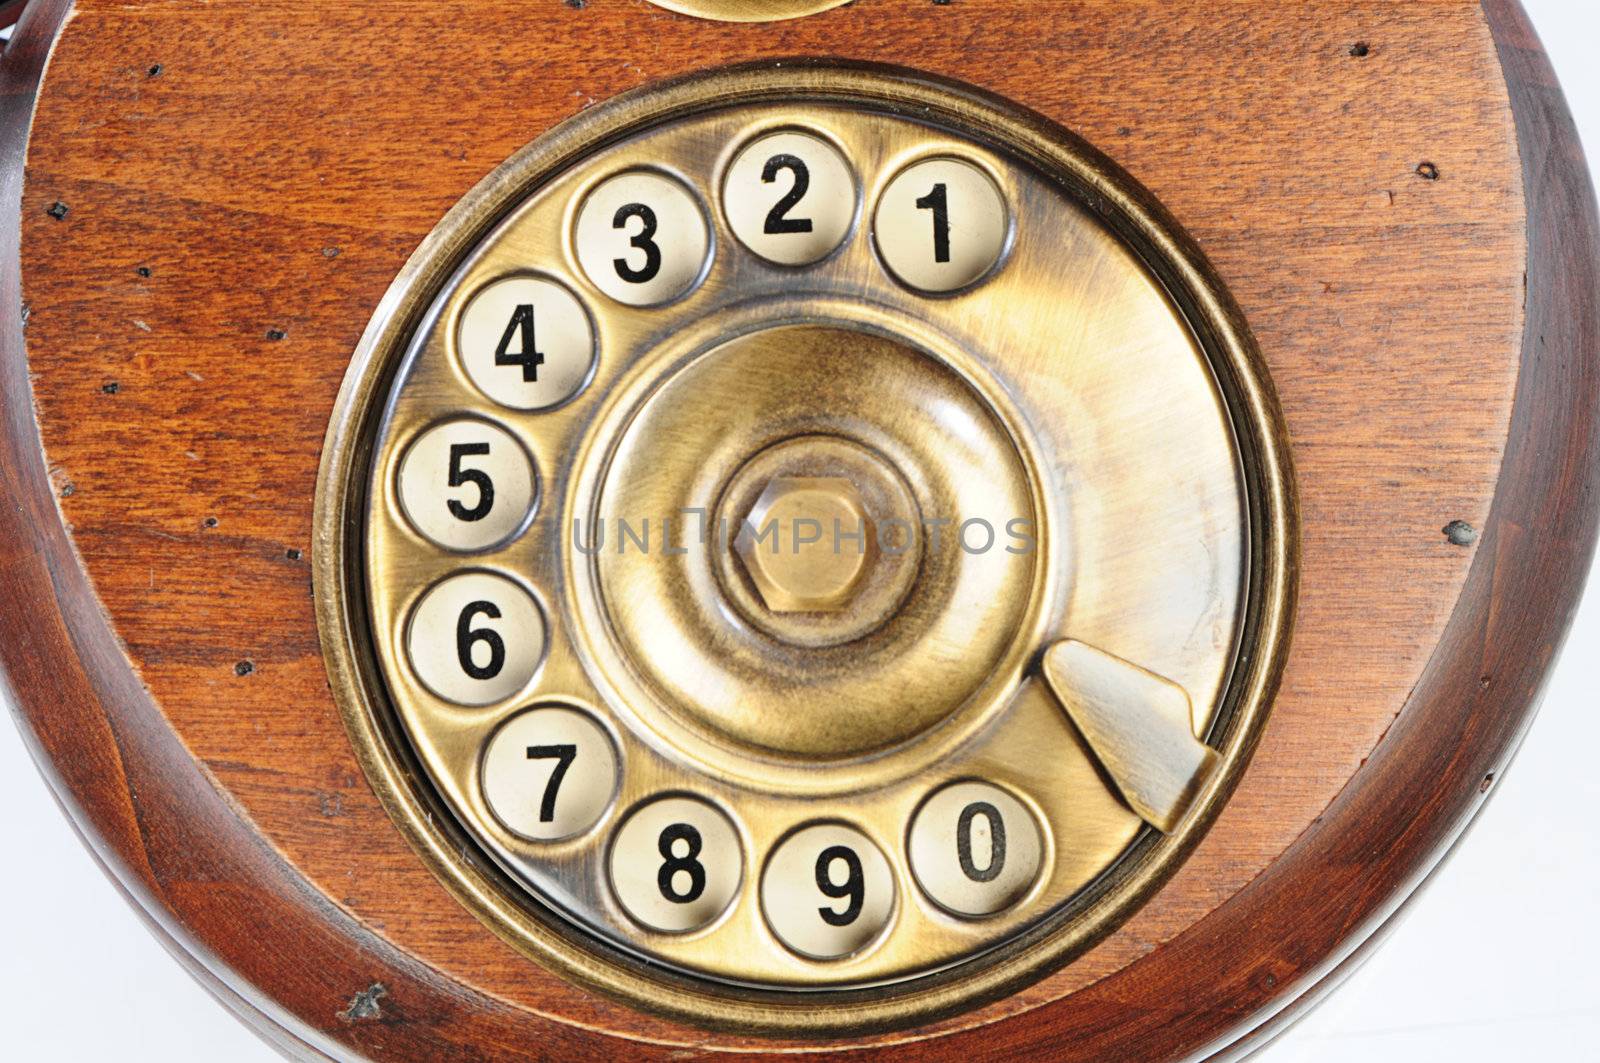 old-fashioned phone dial  by dyoma